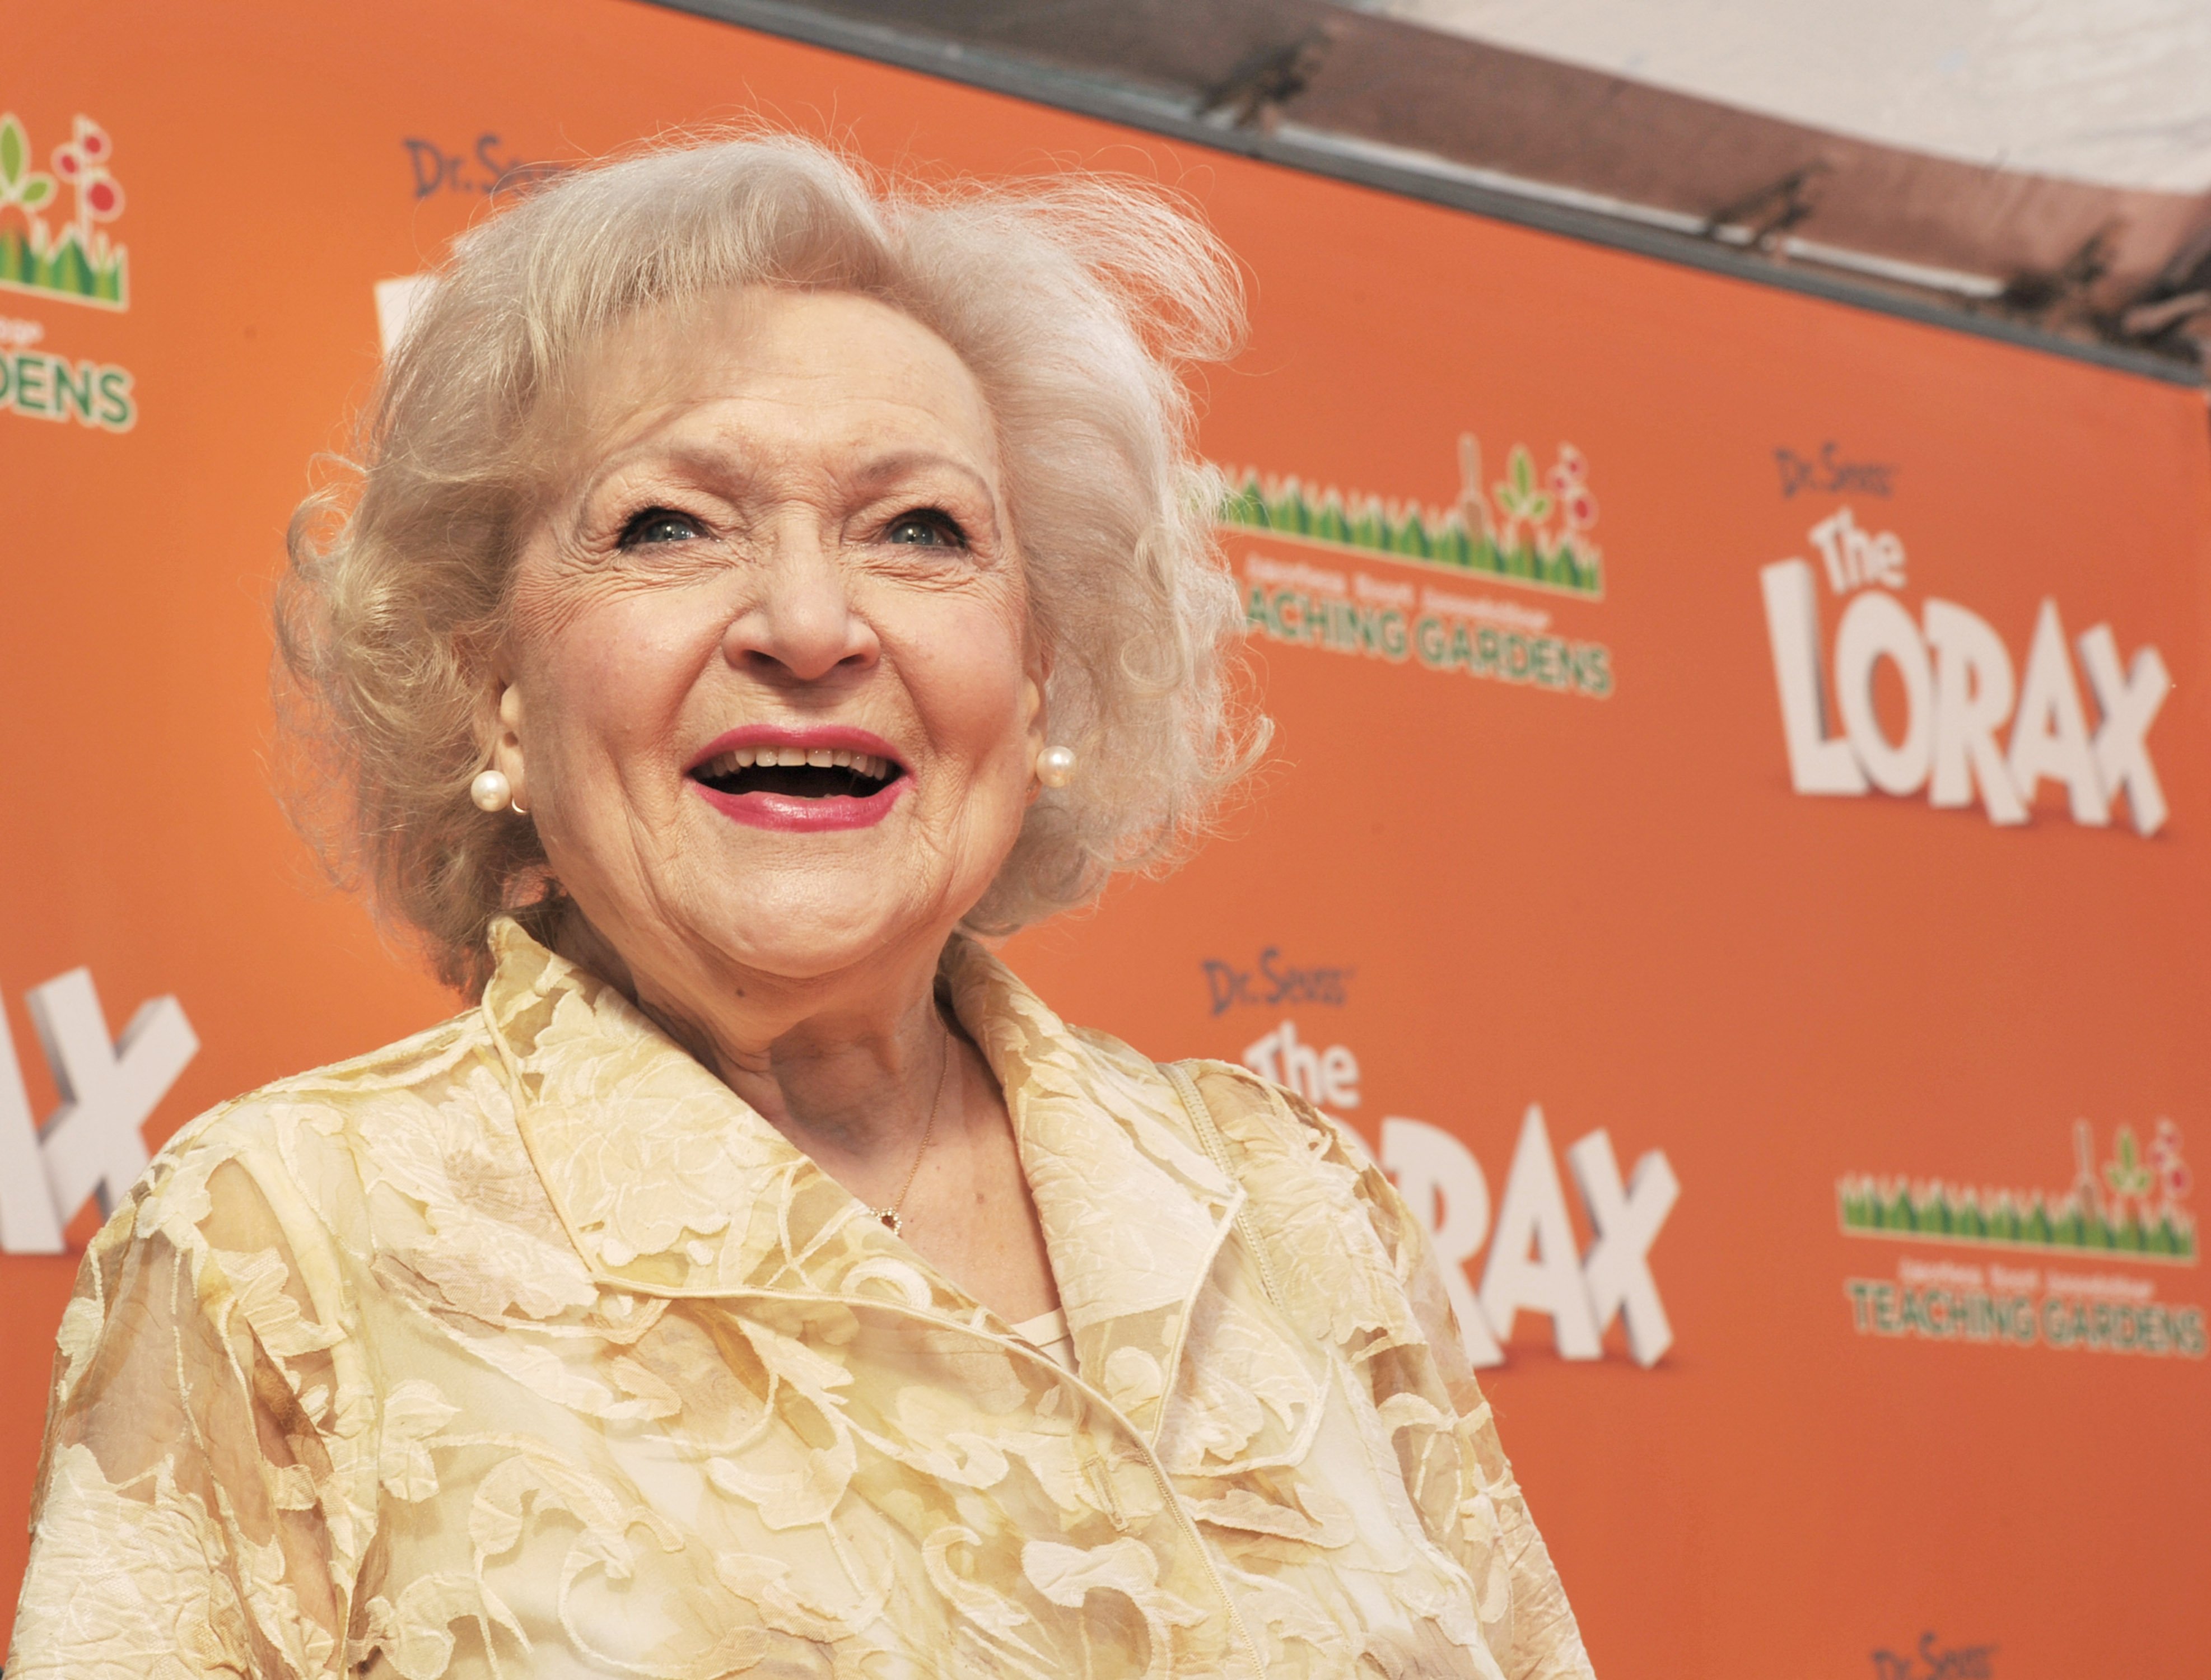 Betty White at the premiere of "Dr. Seuss' The Lorax" at Citywalk on February 19, 2012 | Photo: Getty Images